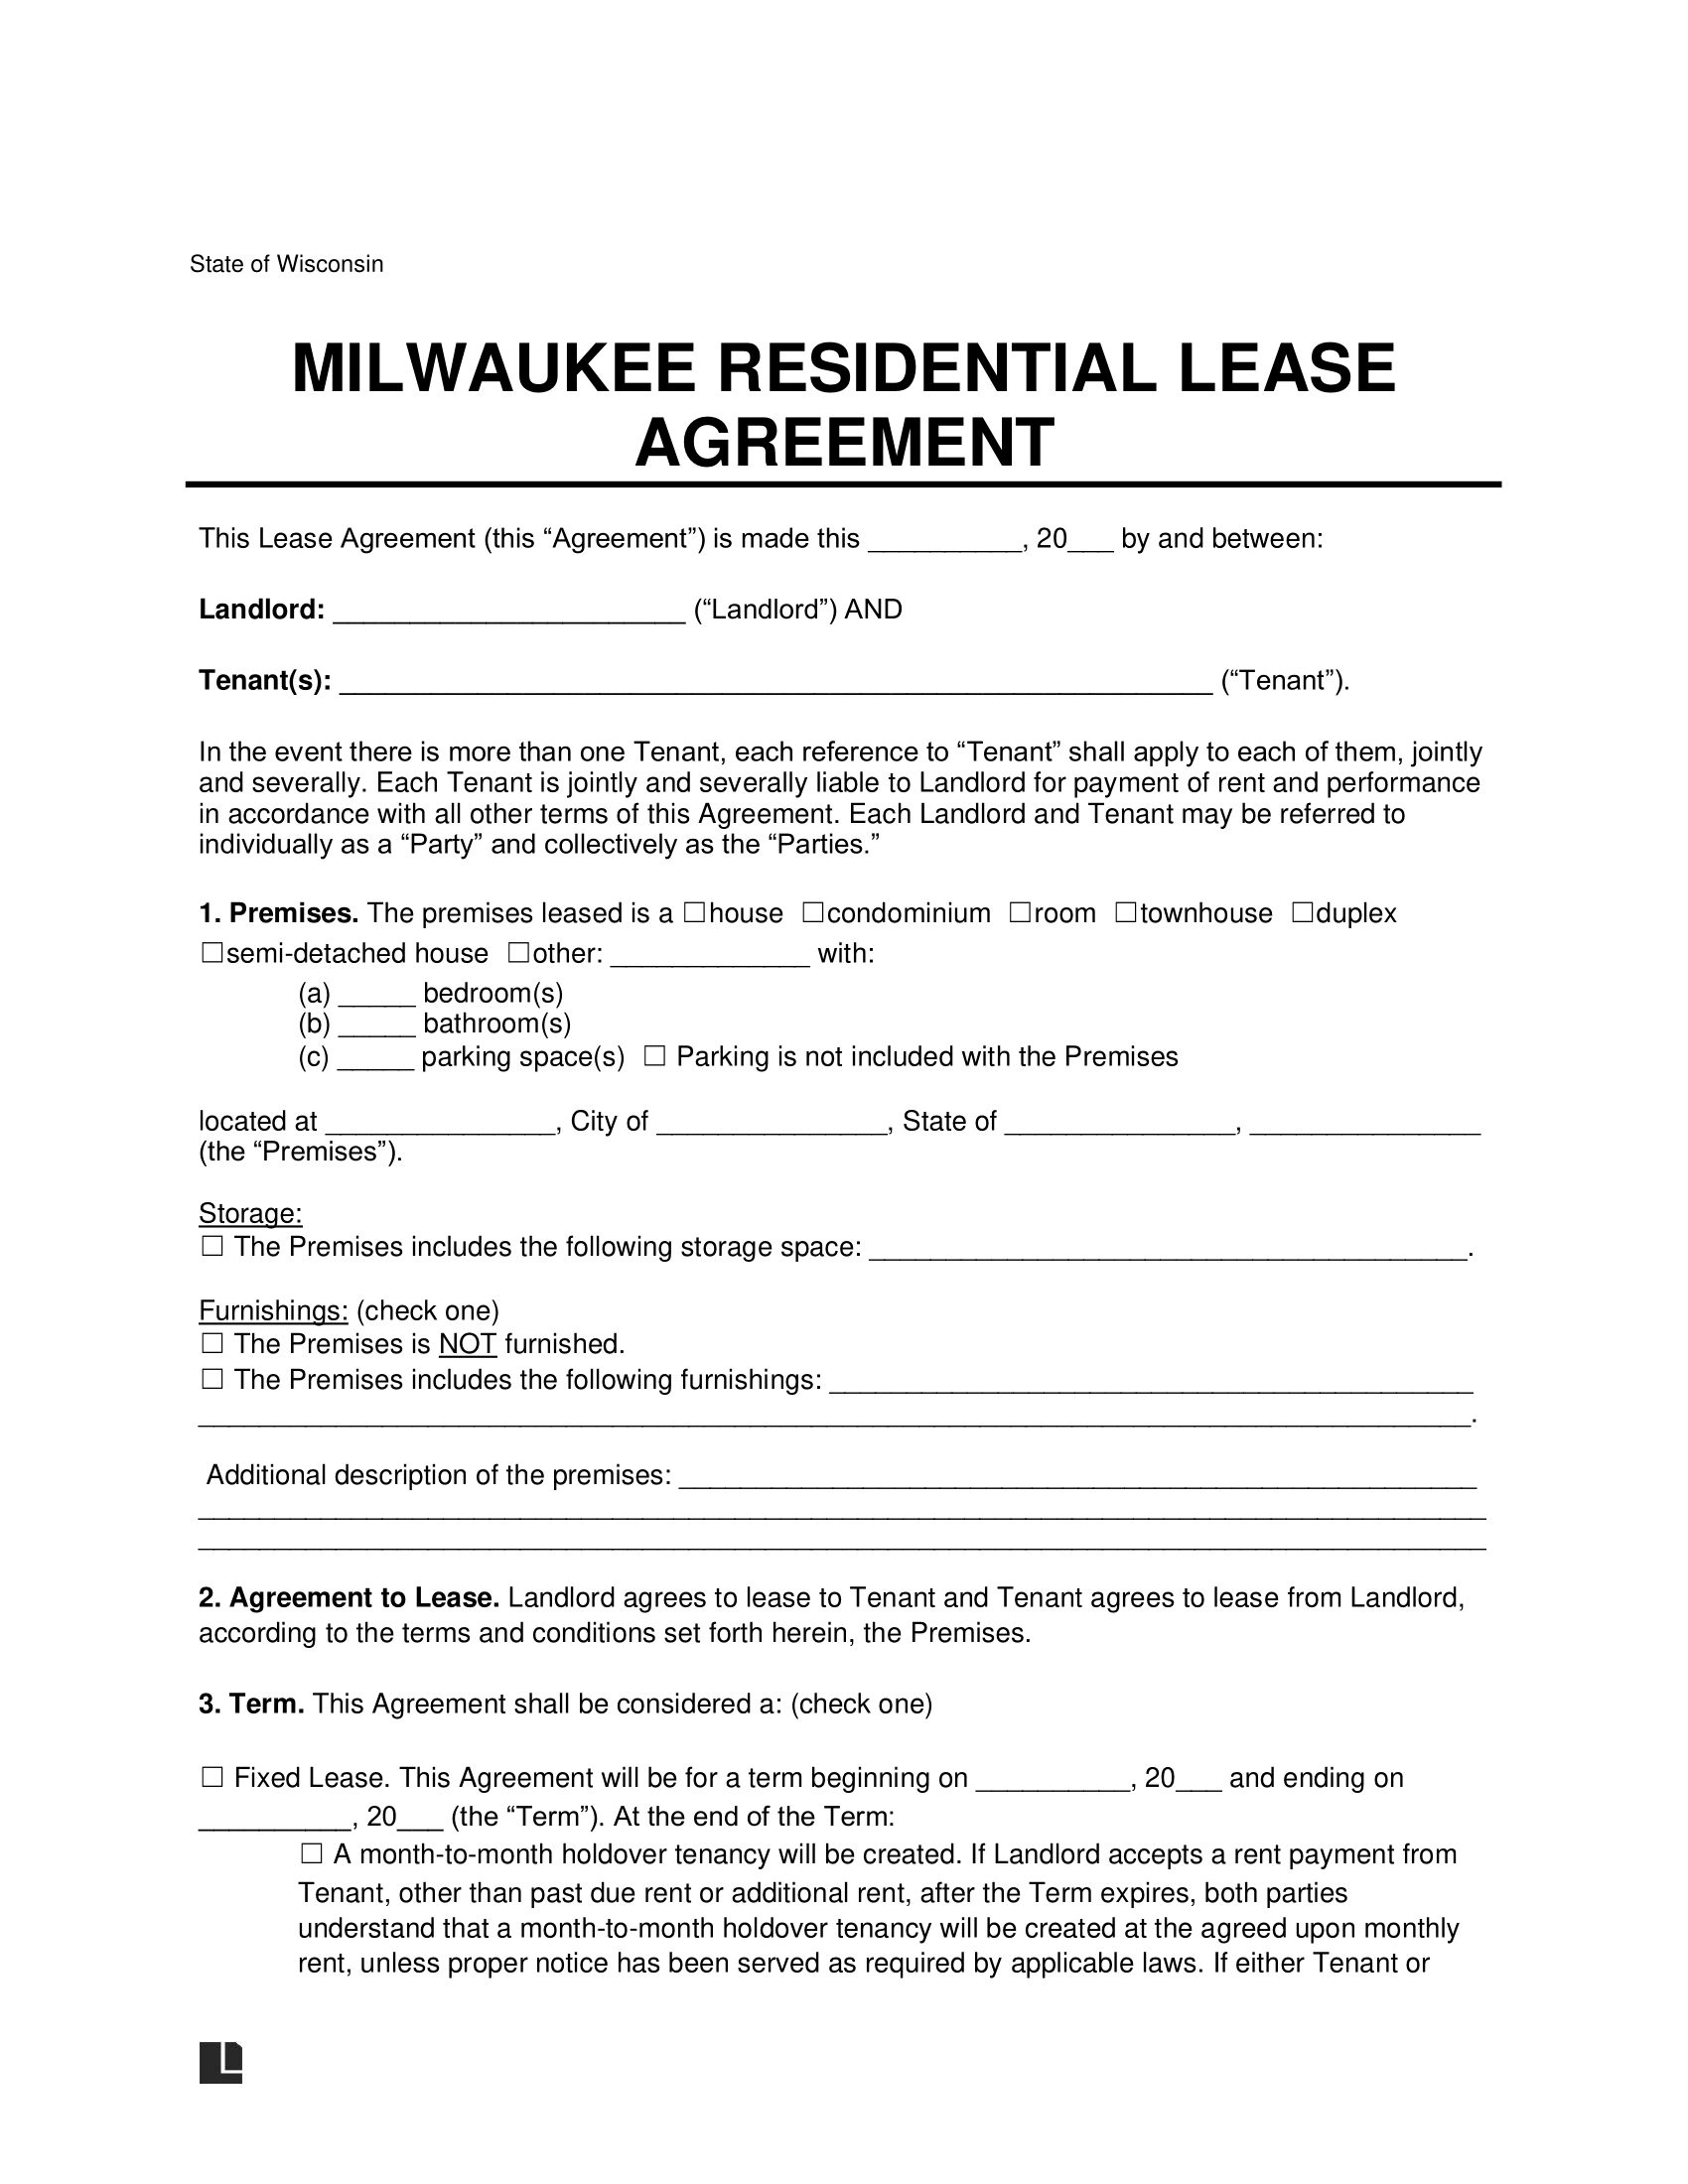 Milwaukee Residential Lease Agreement Template